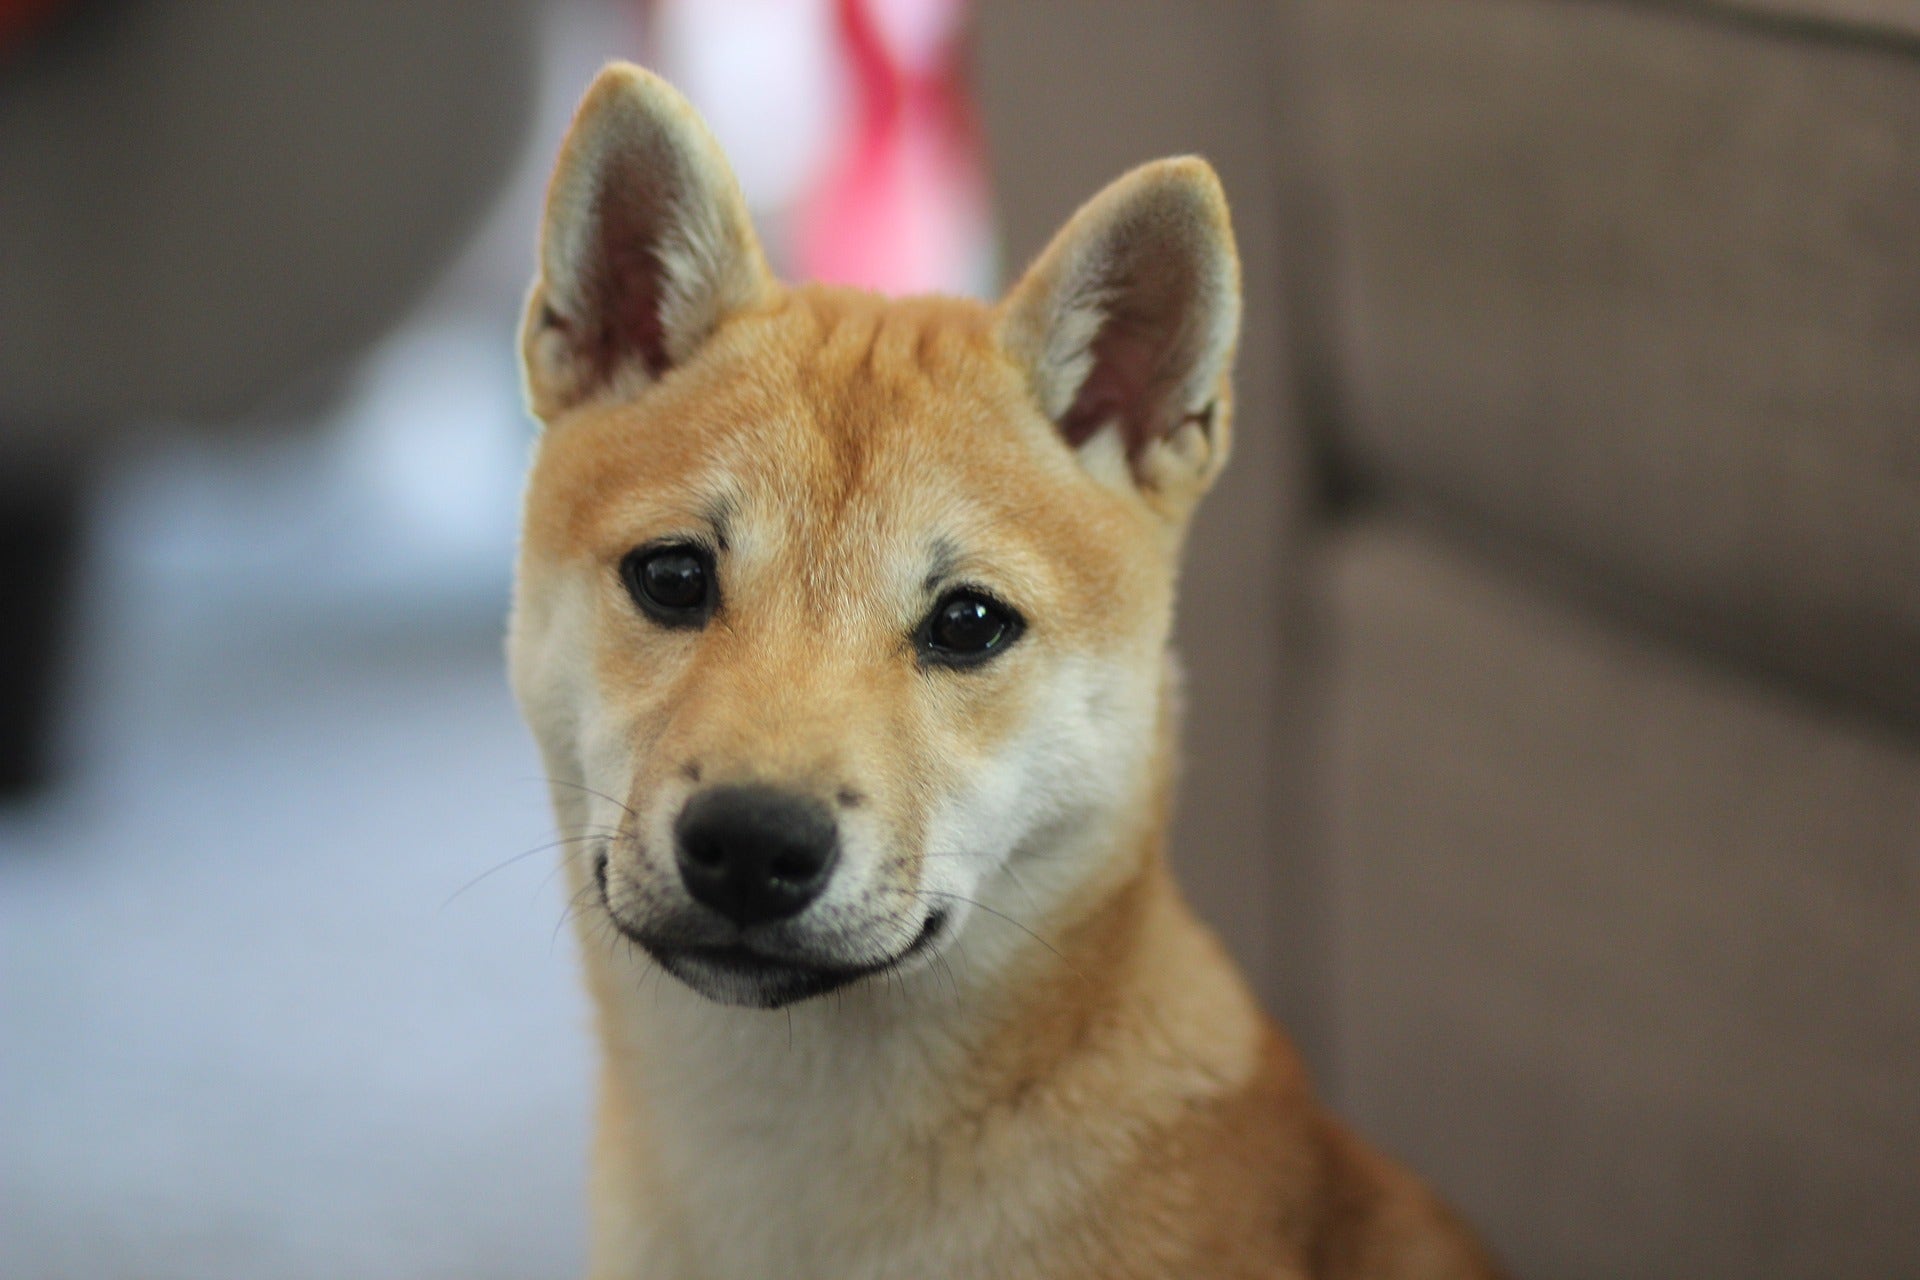 Shiba Inu Coin Trends On Twitter, Google: Will SHIB Reach 1 Cent?